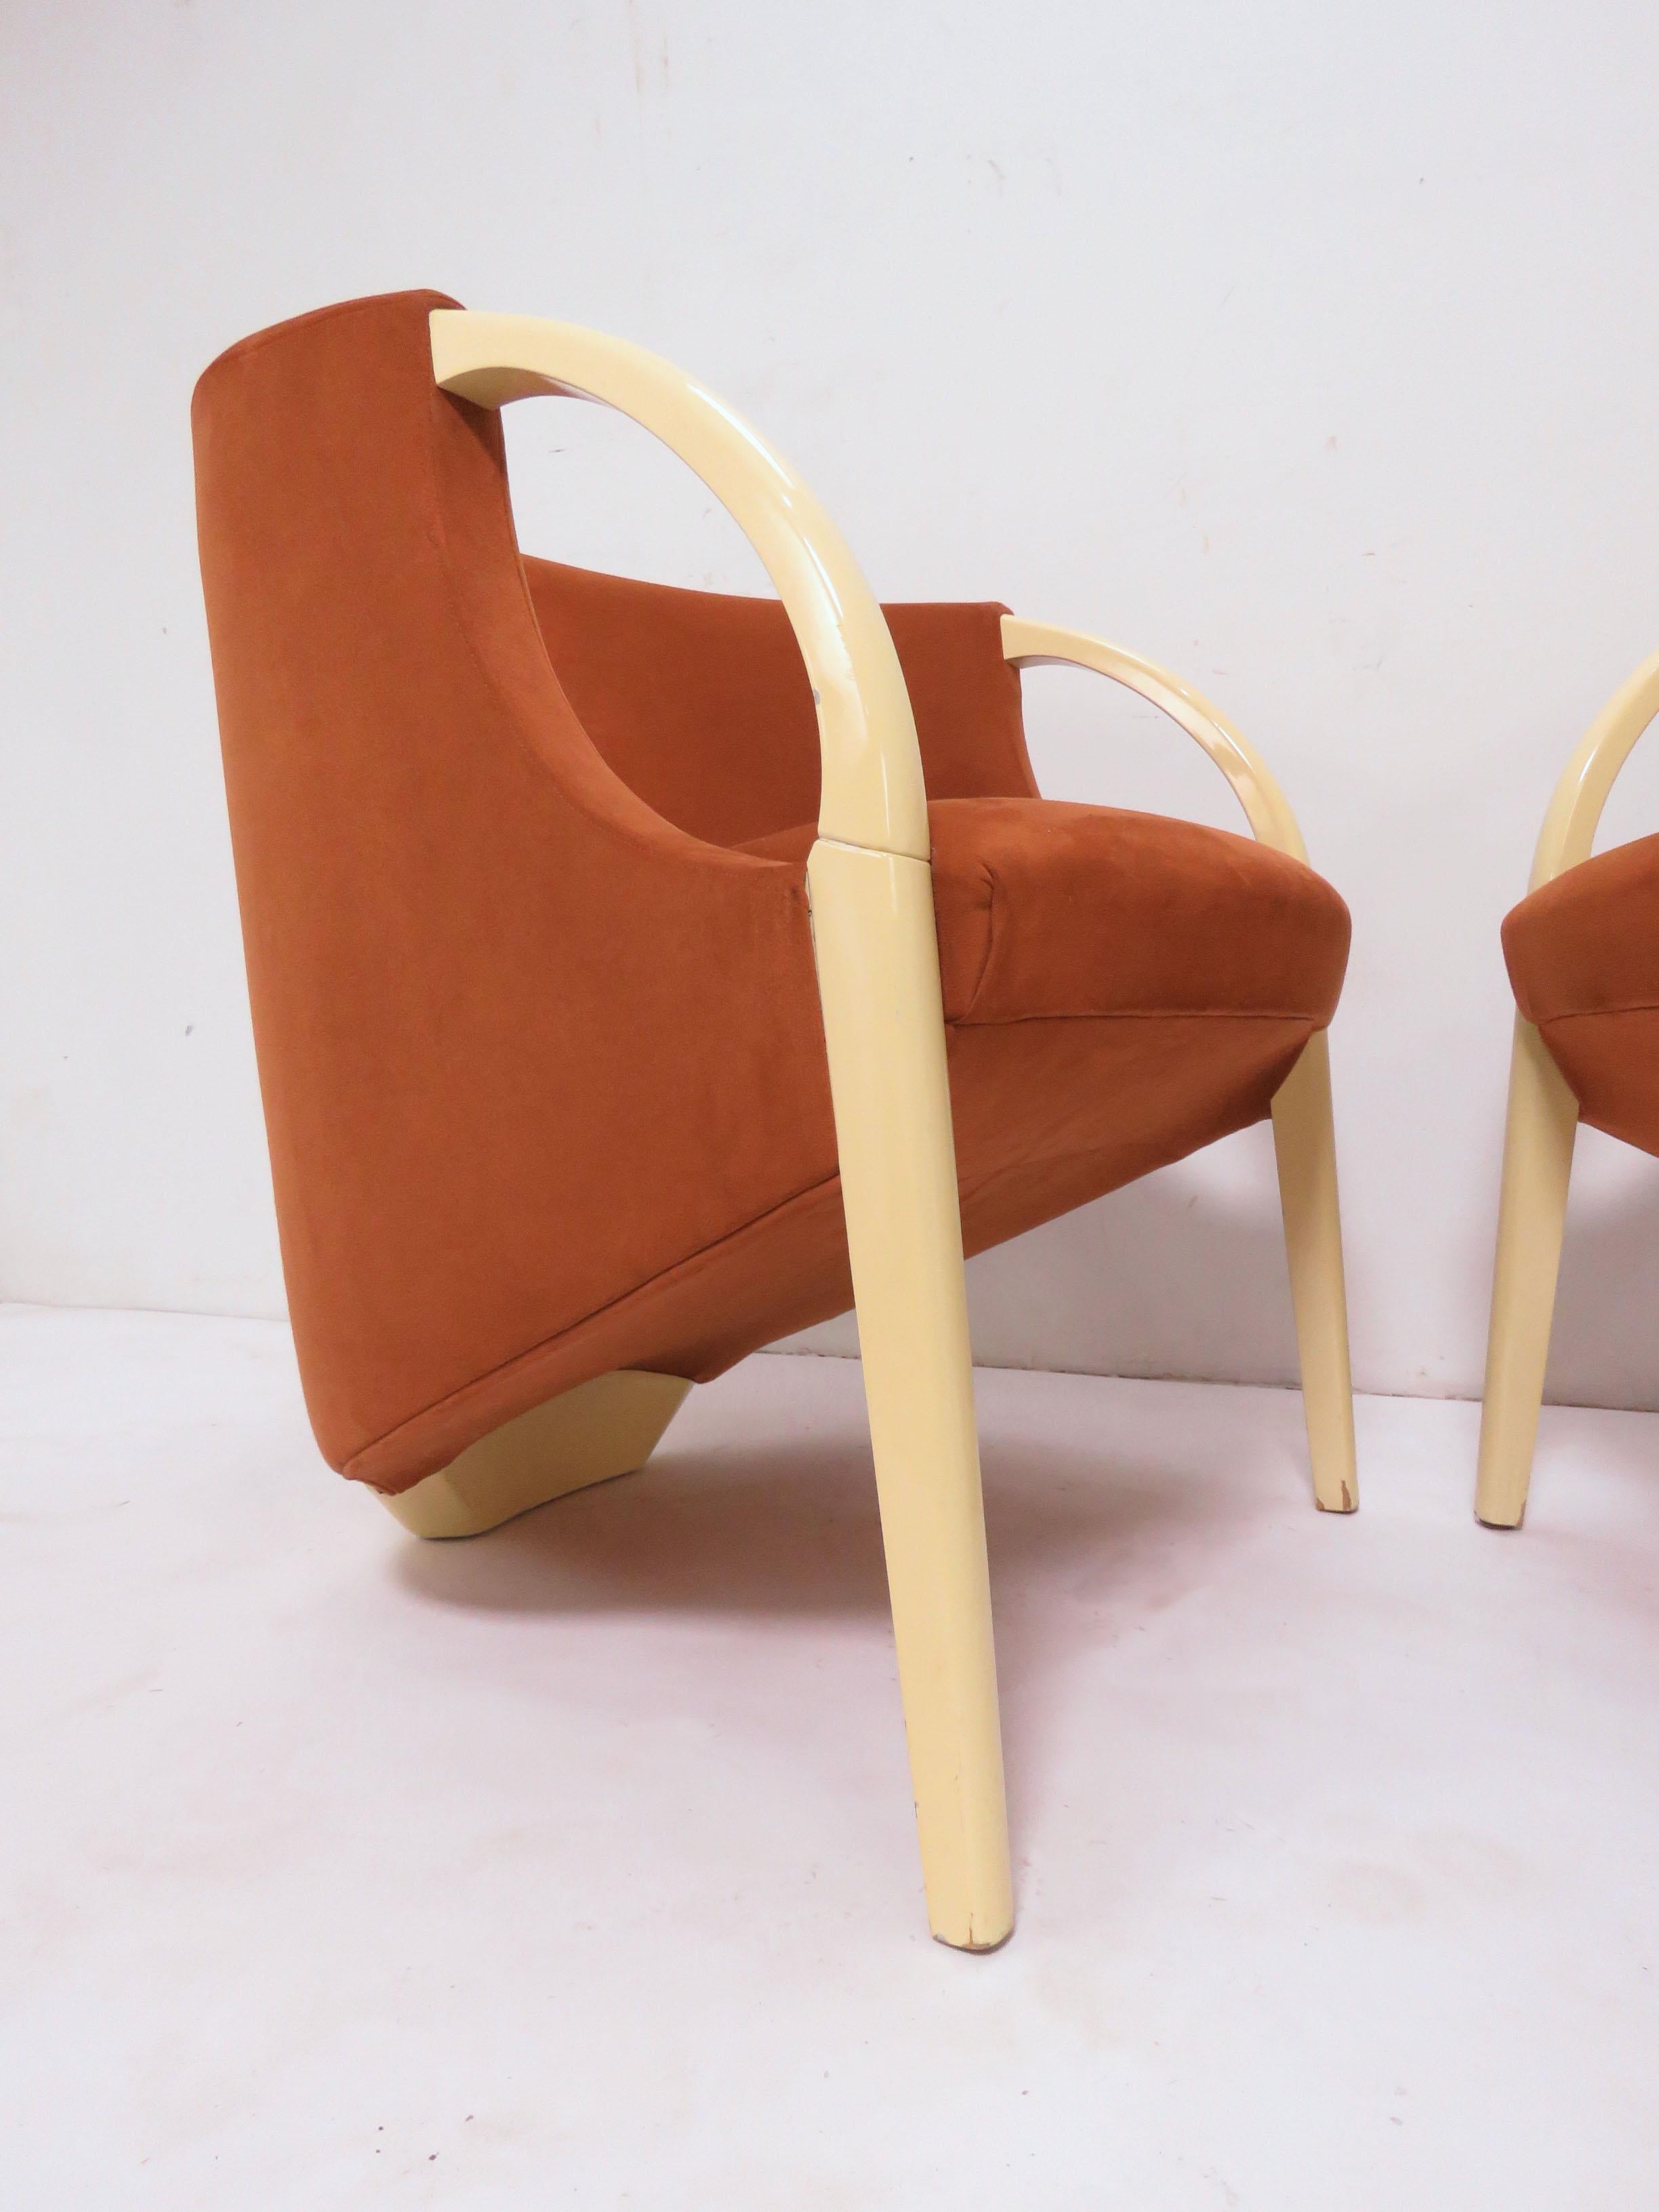 Pair of sculptural lounge chairs, circa 1970s, in original burnt orange ultra-suede upholstery with ivory lacquered arms and frames. Unusual three-legged construction reminiscent of a design by Vladimir Kagan.